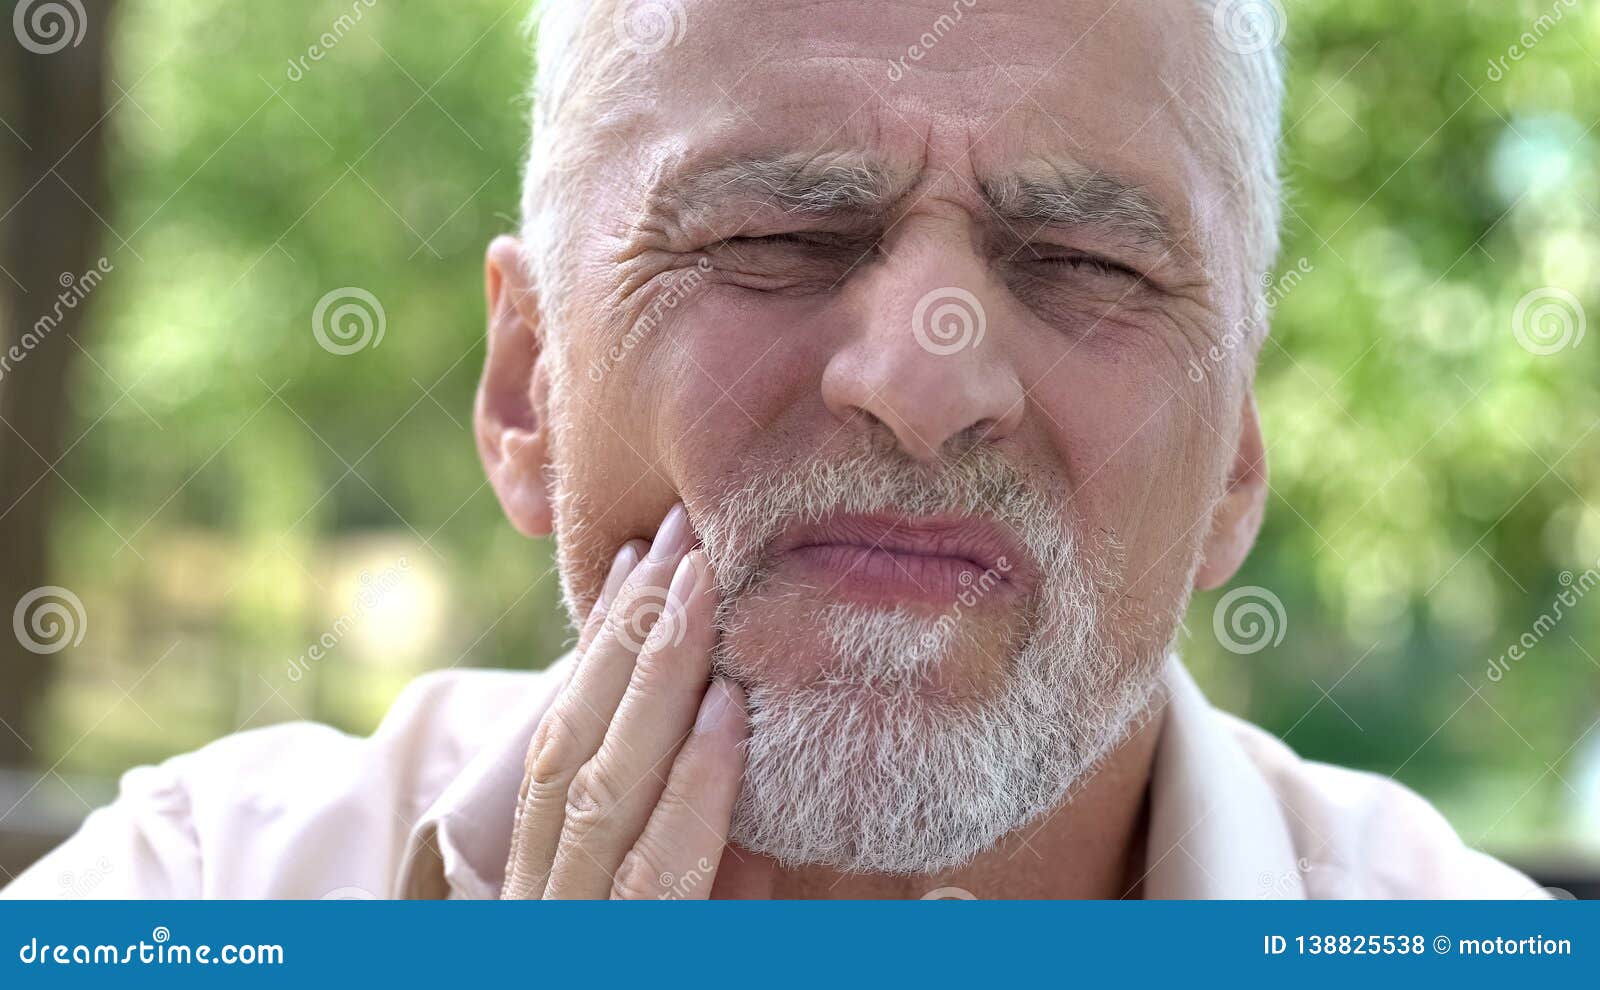 Retired Man Suffering from Toothache, Discomfort with Implants, Dental ...